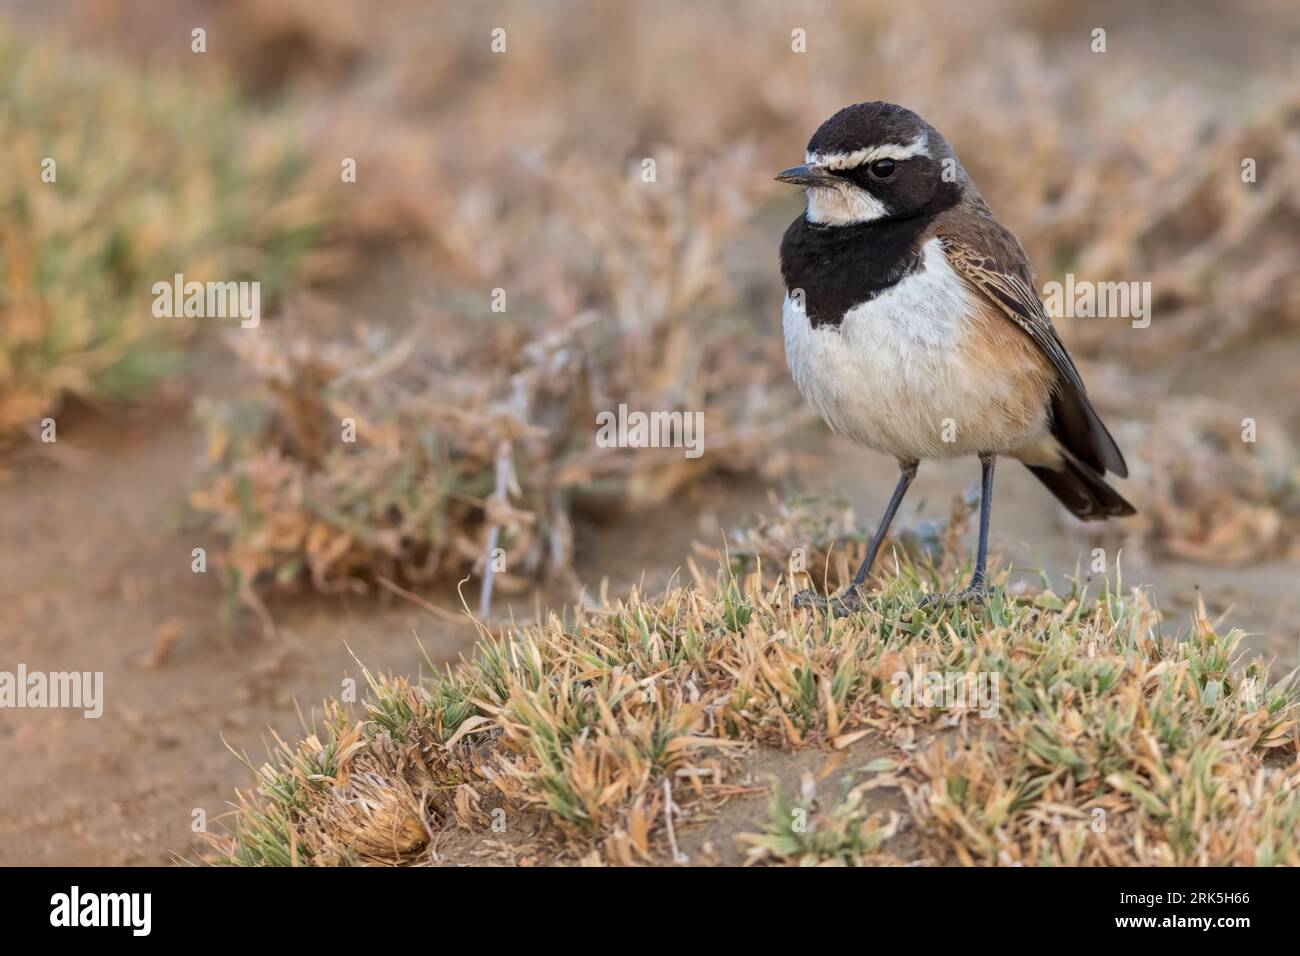 Capped Wheatear (Oenanthe pileata) perched on the ground in Tanzania. Stock Photo